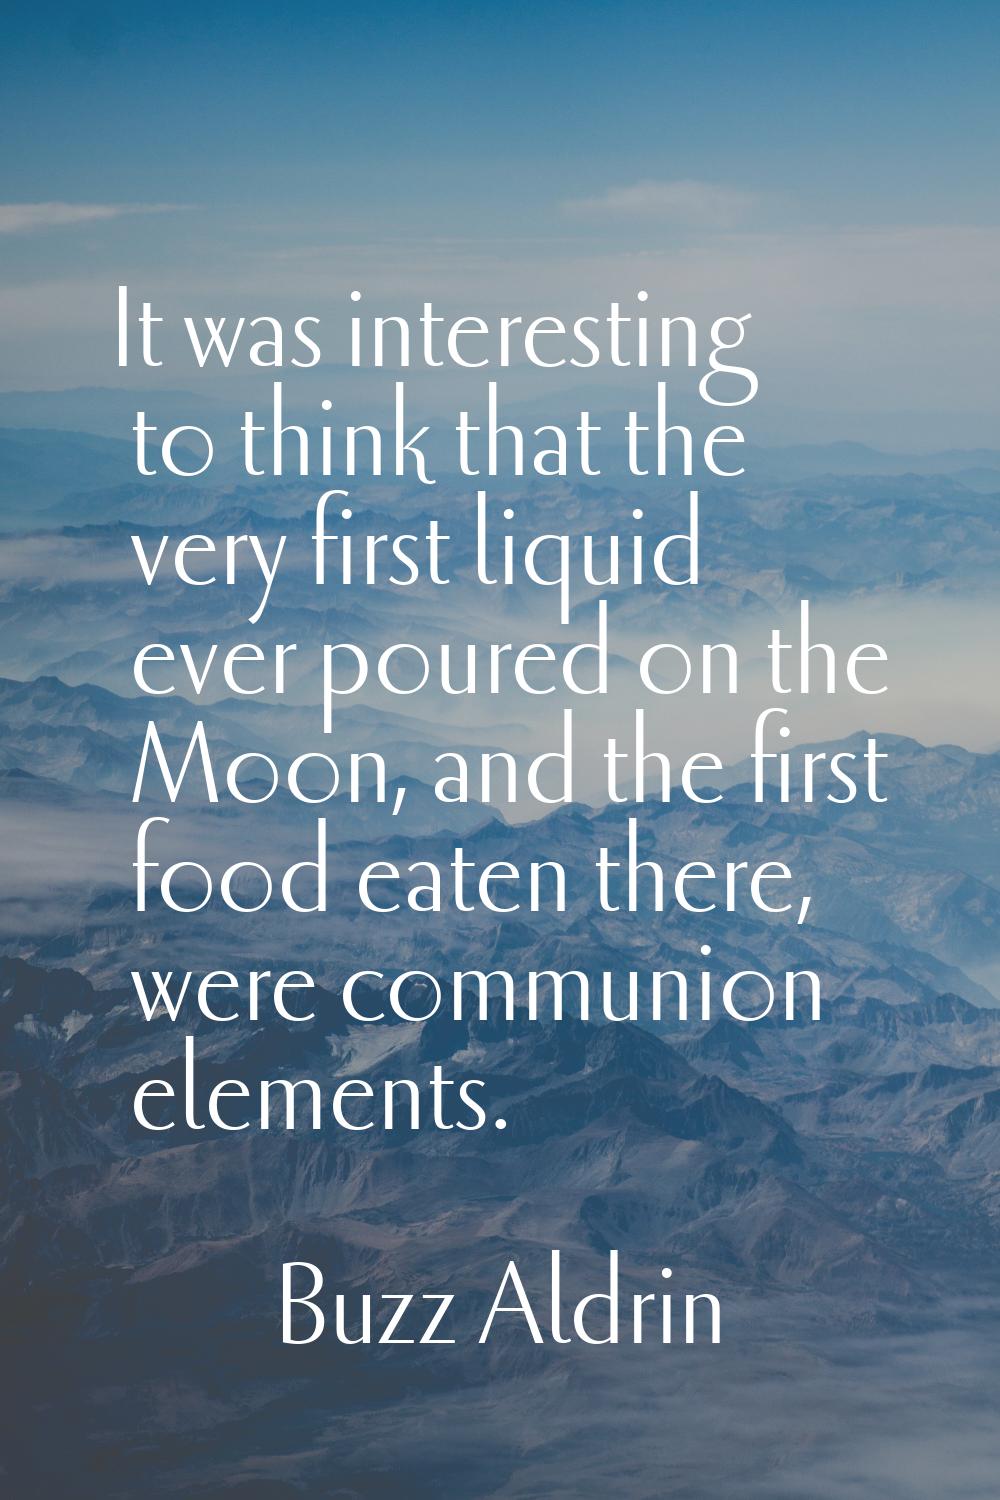 It was interesting to think that the very first liquid ever poured on the Moon, and the first food 